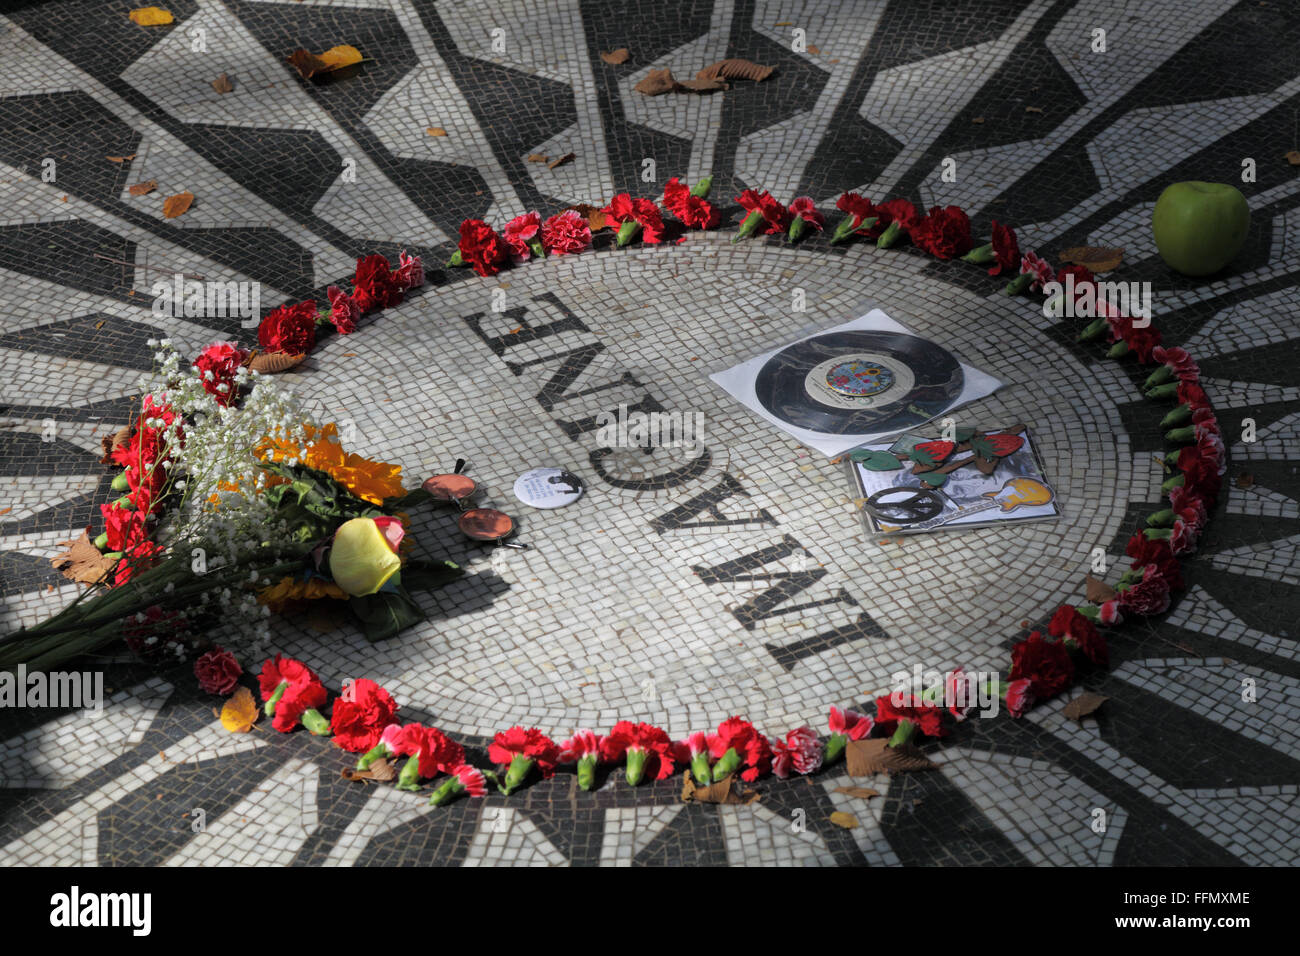 John Lennon, band playing The Beatles, Strawberry Fields, Central Park, New York City, USA, Stock Photo